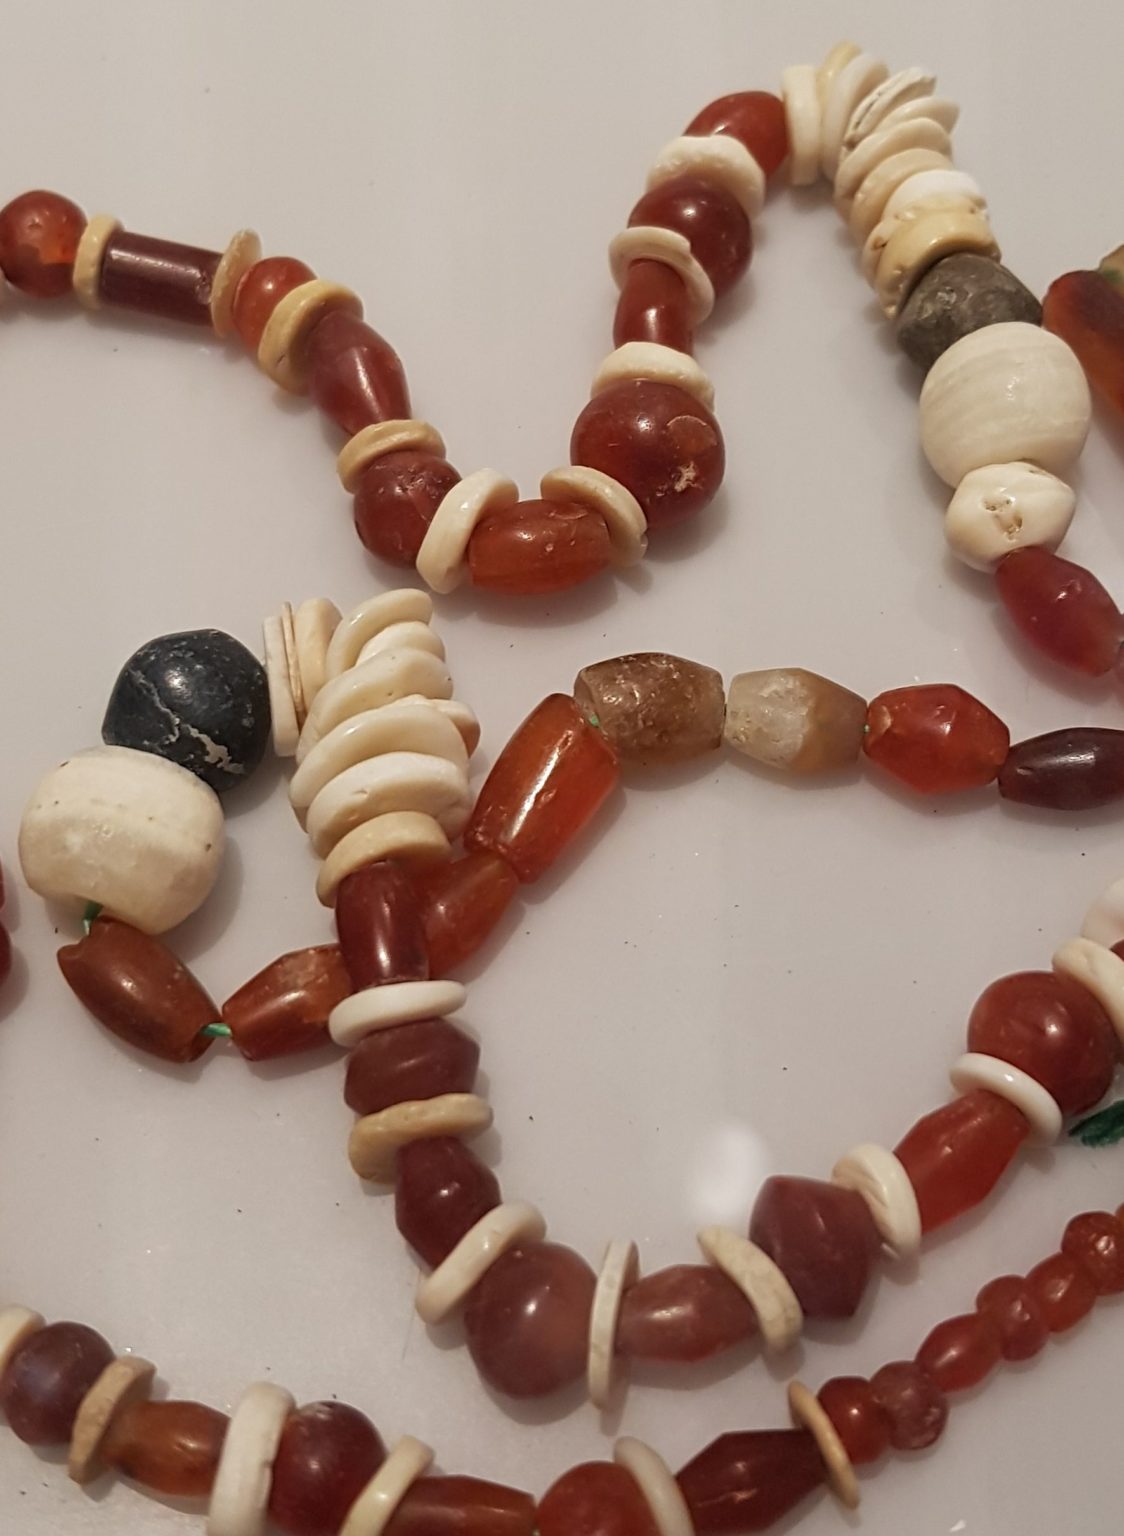 Carnelian beads from Indus Valley Civilisation